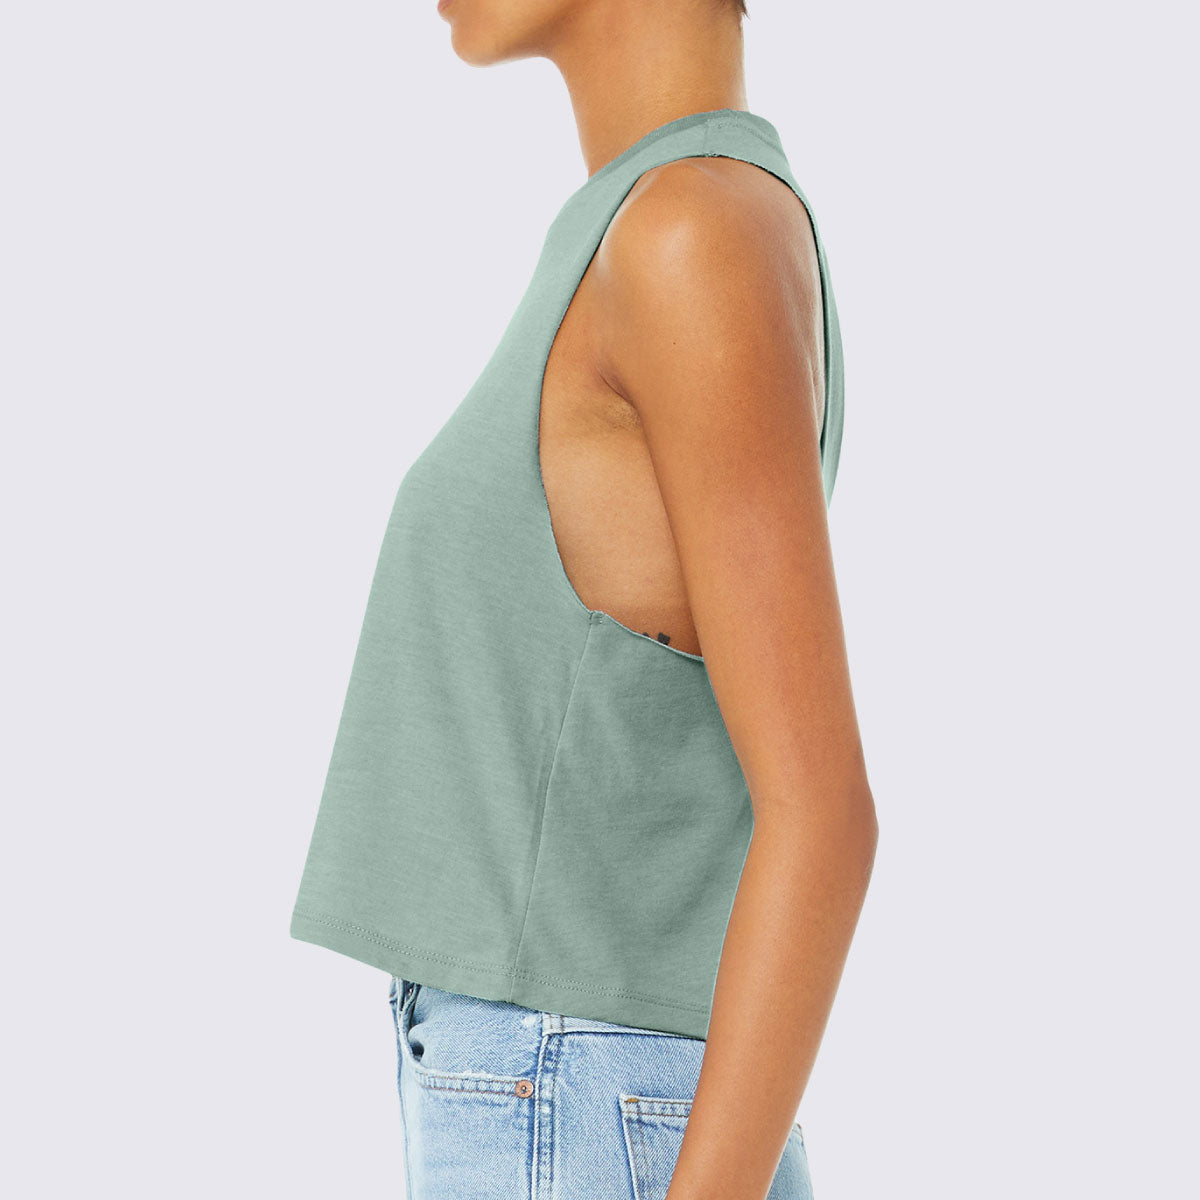 Workout Tank Racerback Cropped Tank - The LFT Clothing Company